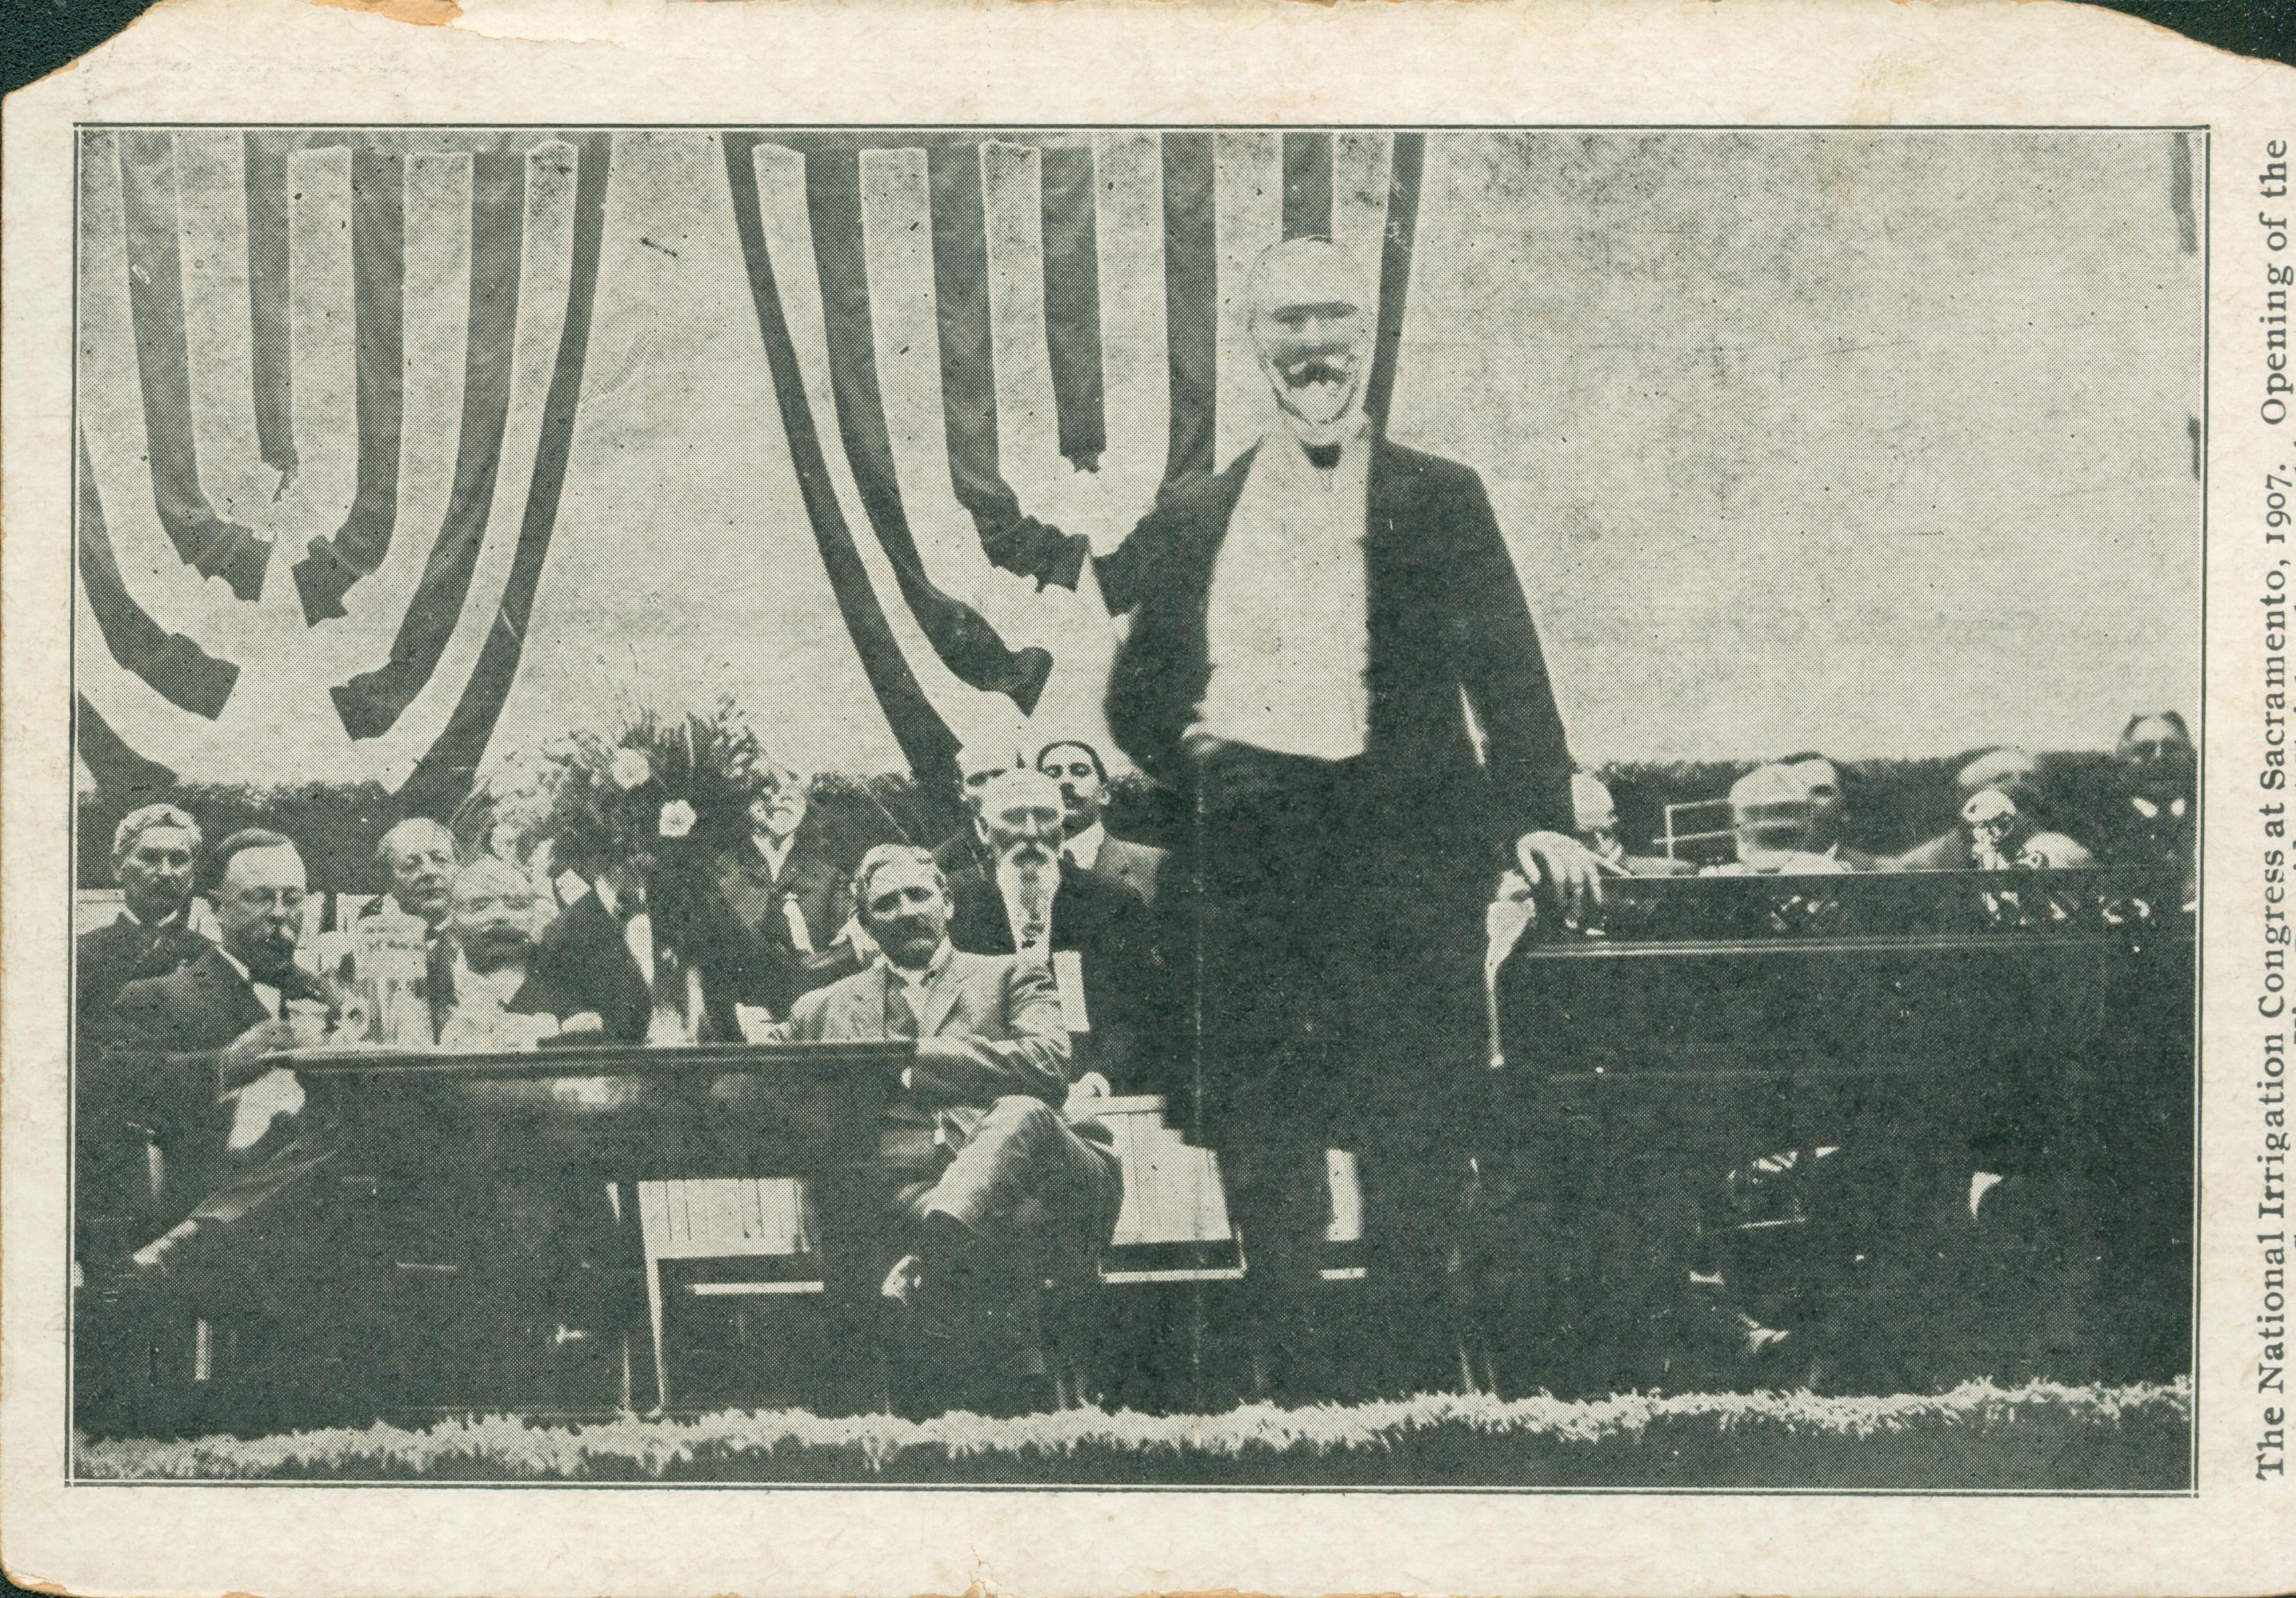 This postcard shows a Mr. Fairbanks giving a speech with his back to several men seated at desks.